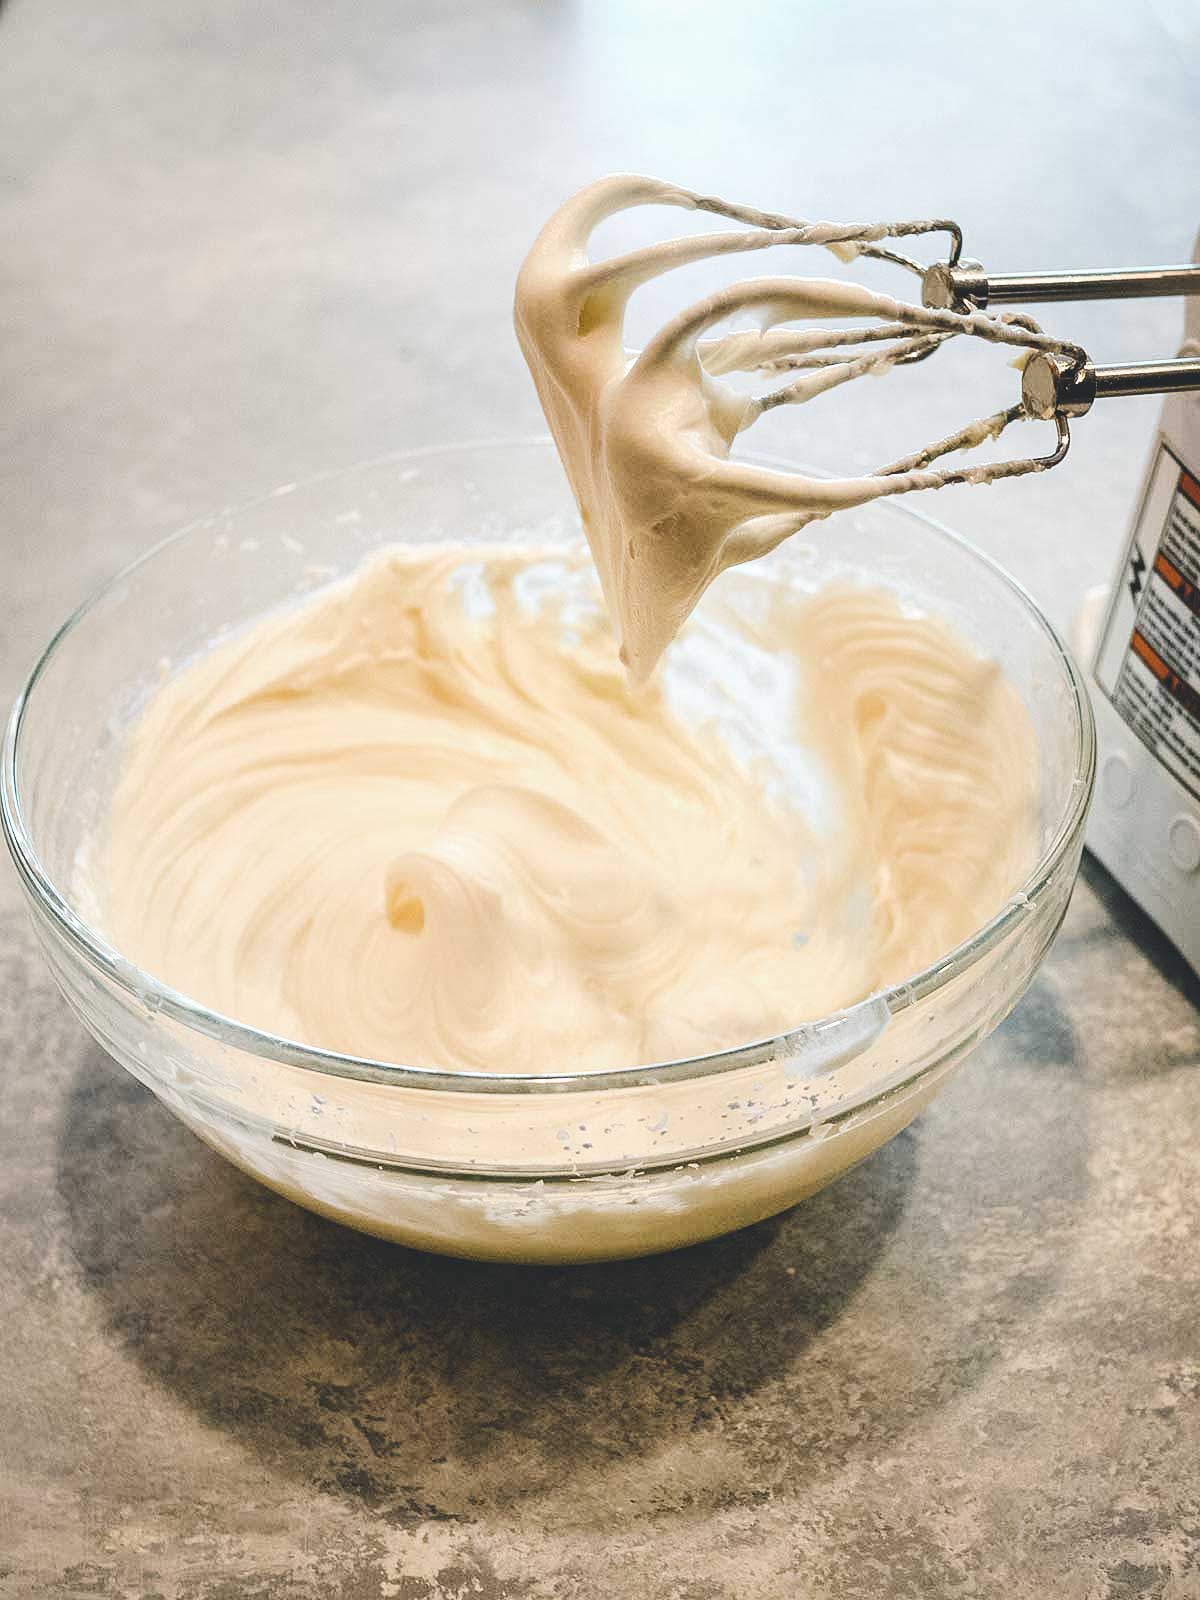 Making the cream cheese icing.